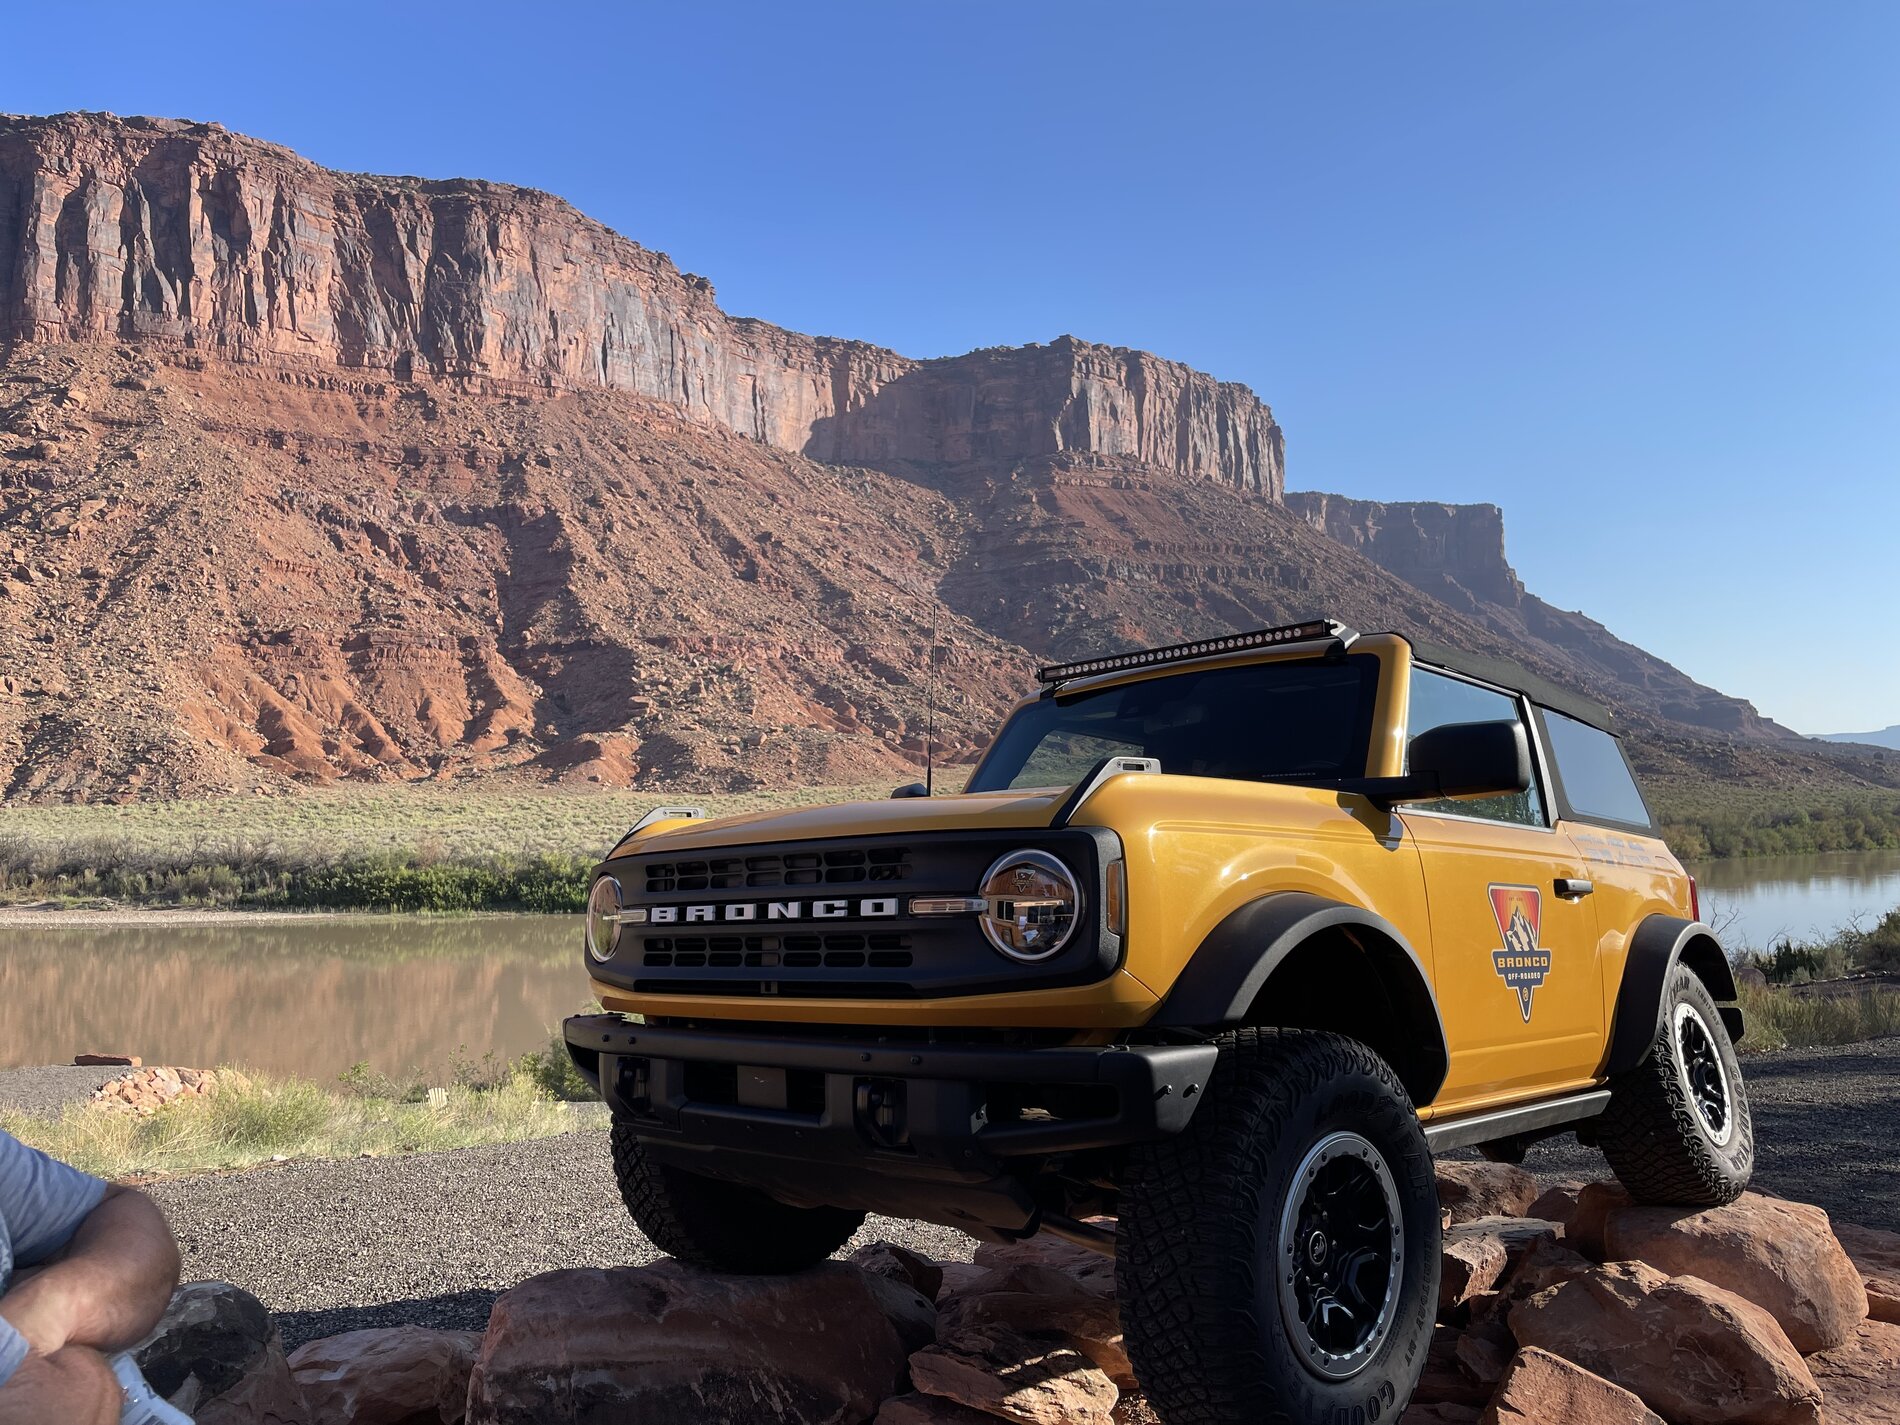 Ford Bronco Bronco Off-Roadeo Photo Competition 0794EAFB-9638-4D15-B728-C13F1D2B5A0B